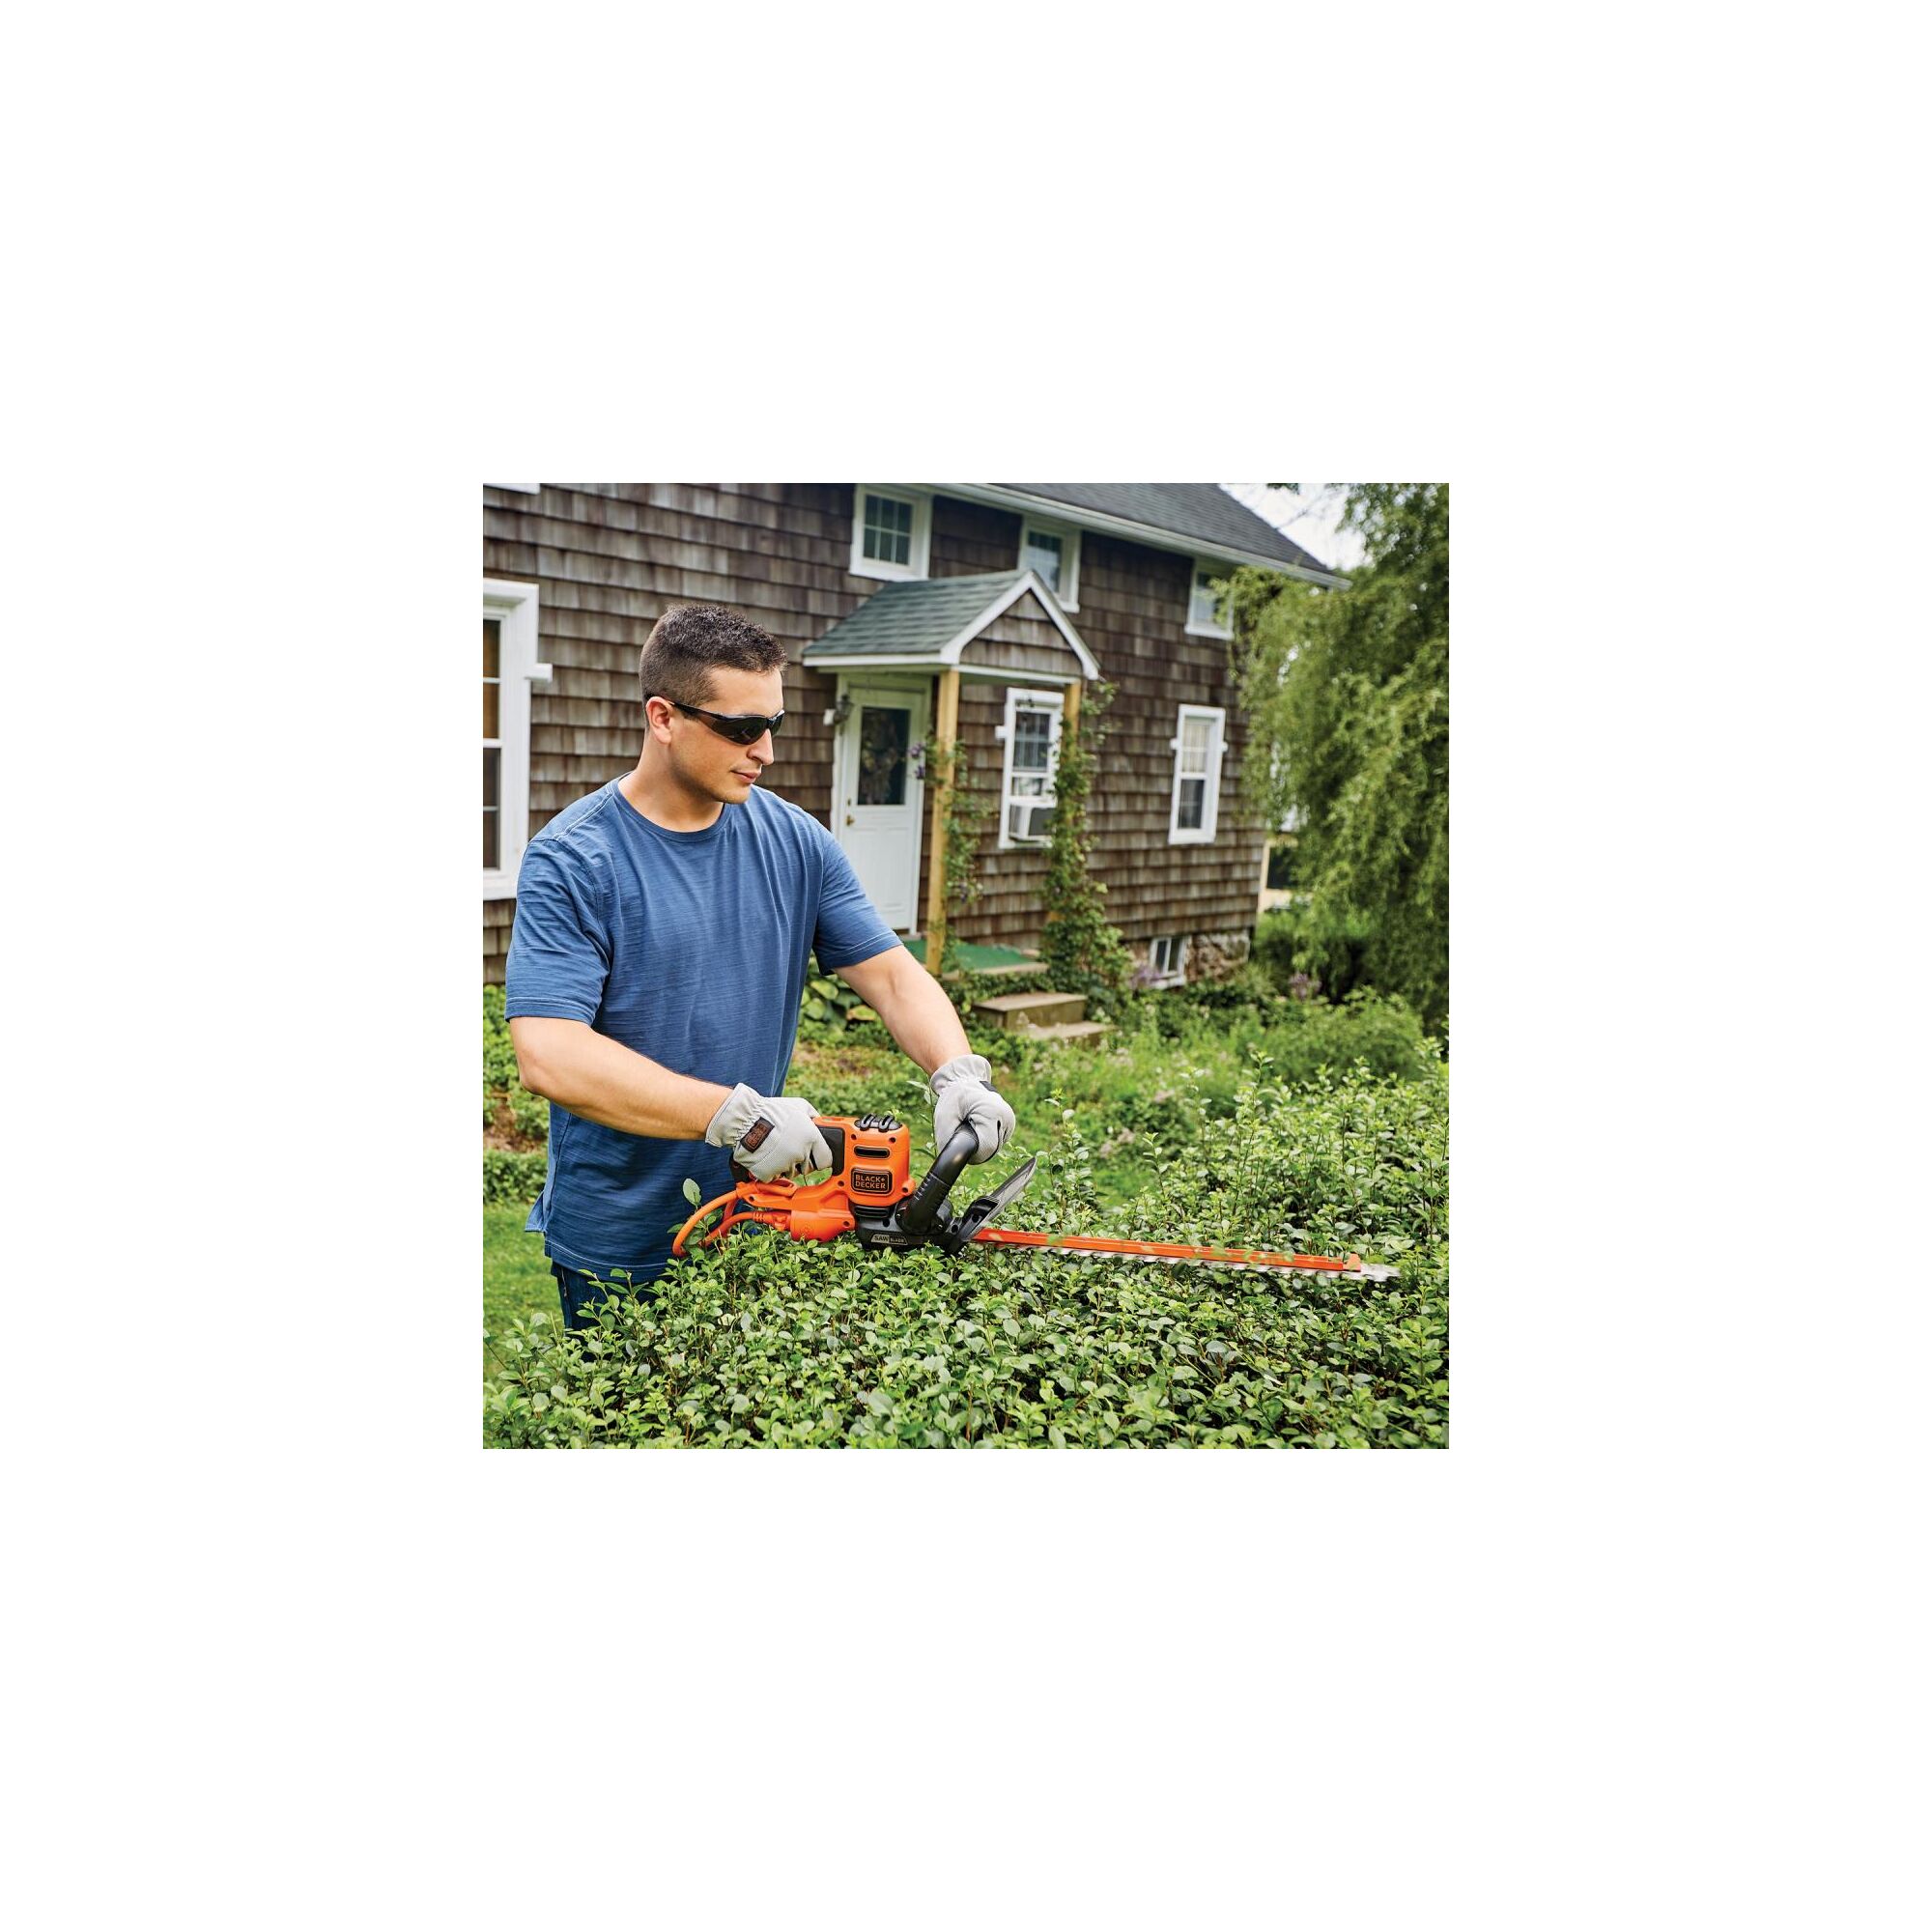 20 inch SAWBLADE electric hedge trimmer being used by a person to trim hedge.